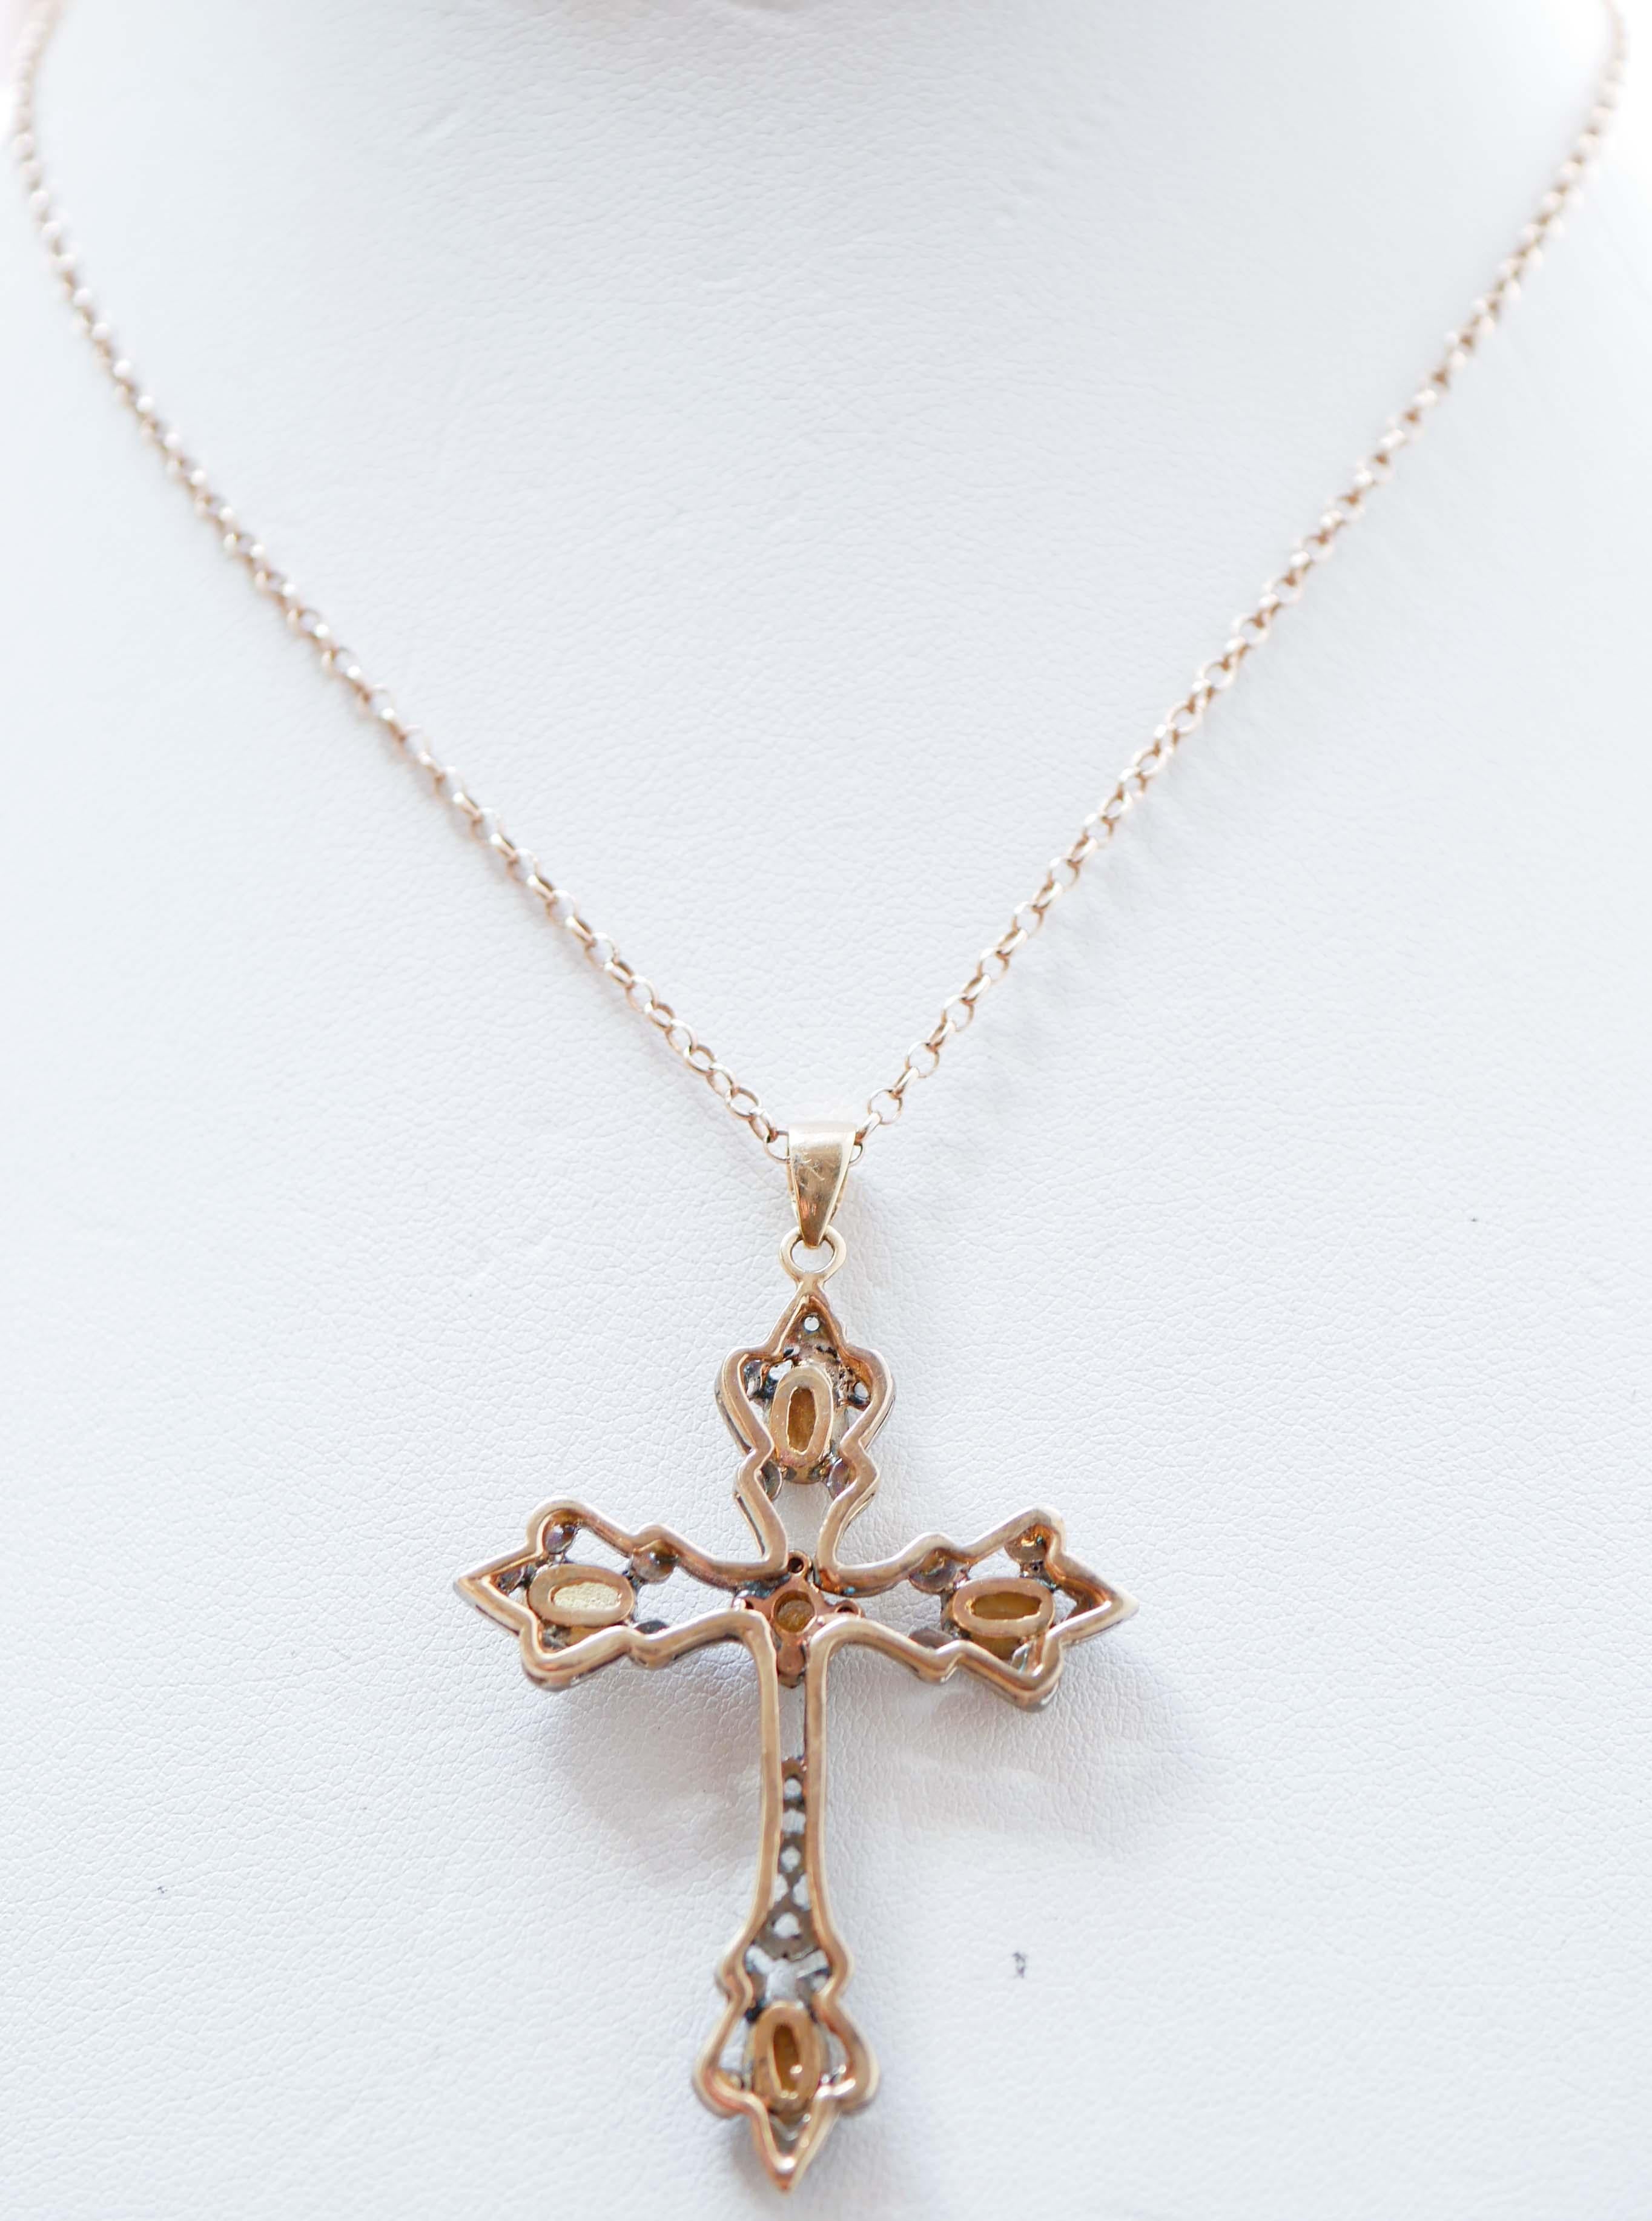 Mixed Cut Topazs, Diamonds, 14 Karat Rose Gold and Silver Cross Pendant Necklace. For Sale